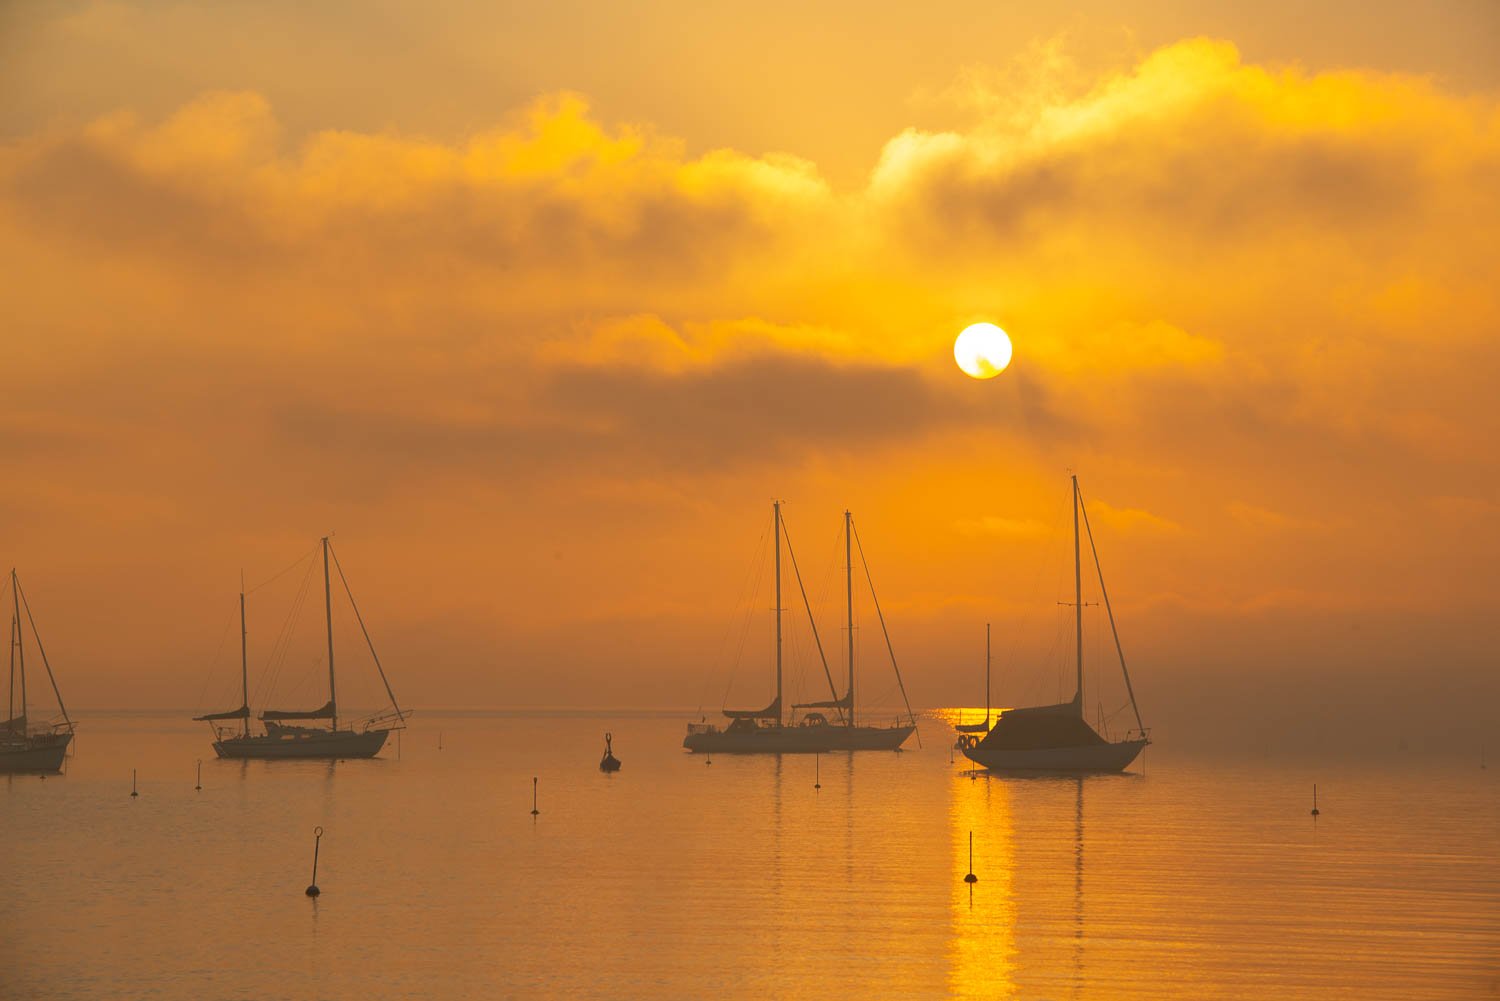 A yellowish sunset effect on a sea with some boats floating in, Golden Glow, Sorrento - Mornington Peninsula